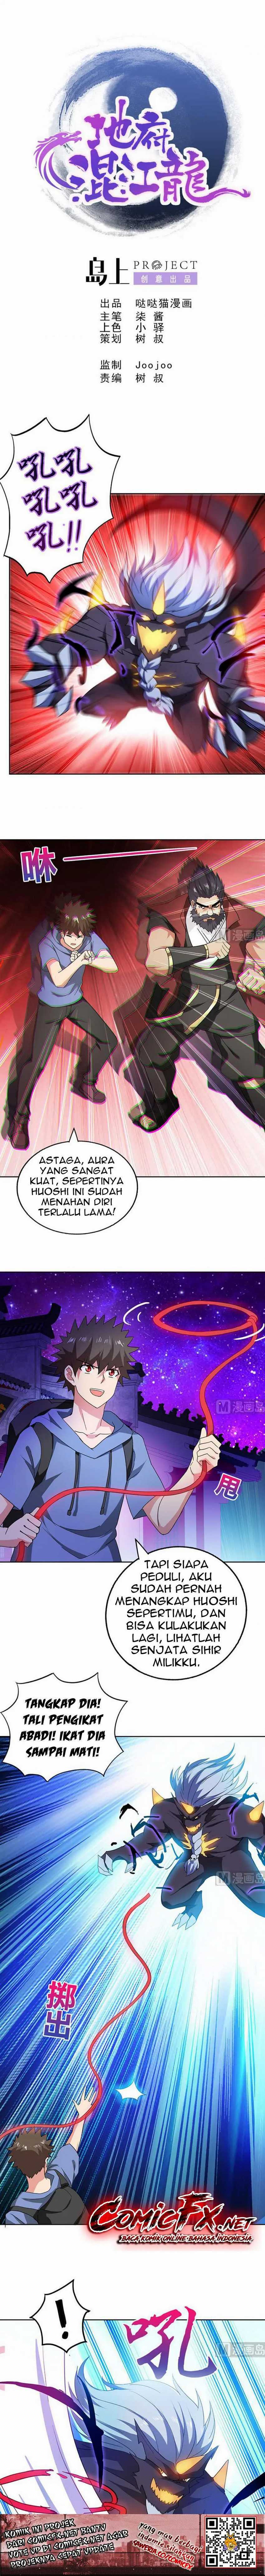 The Nether World Mix of Jiang Long Chapter 62 bahasa indonesia